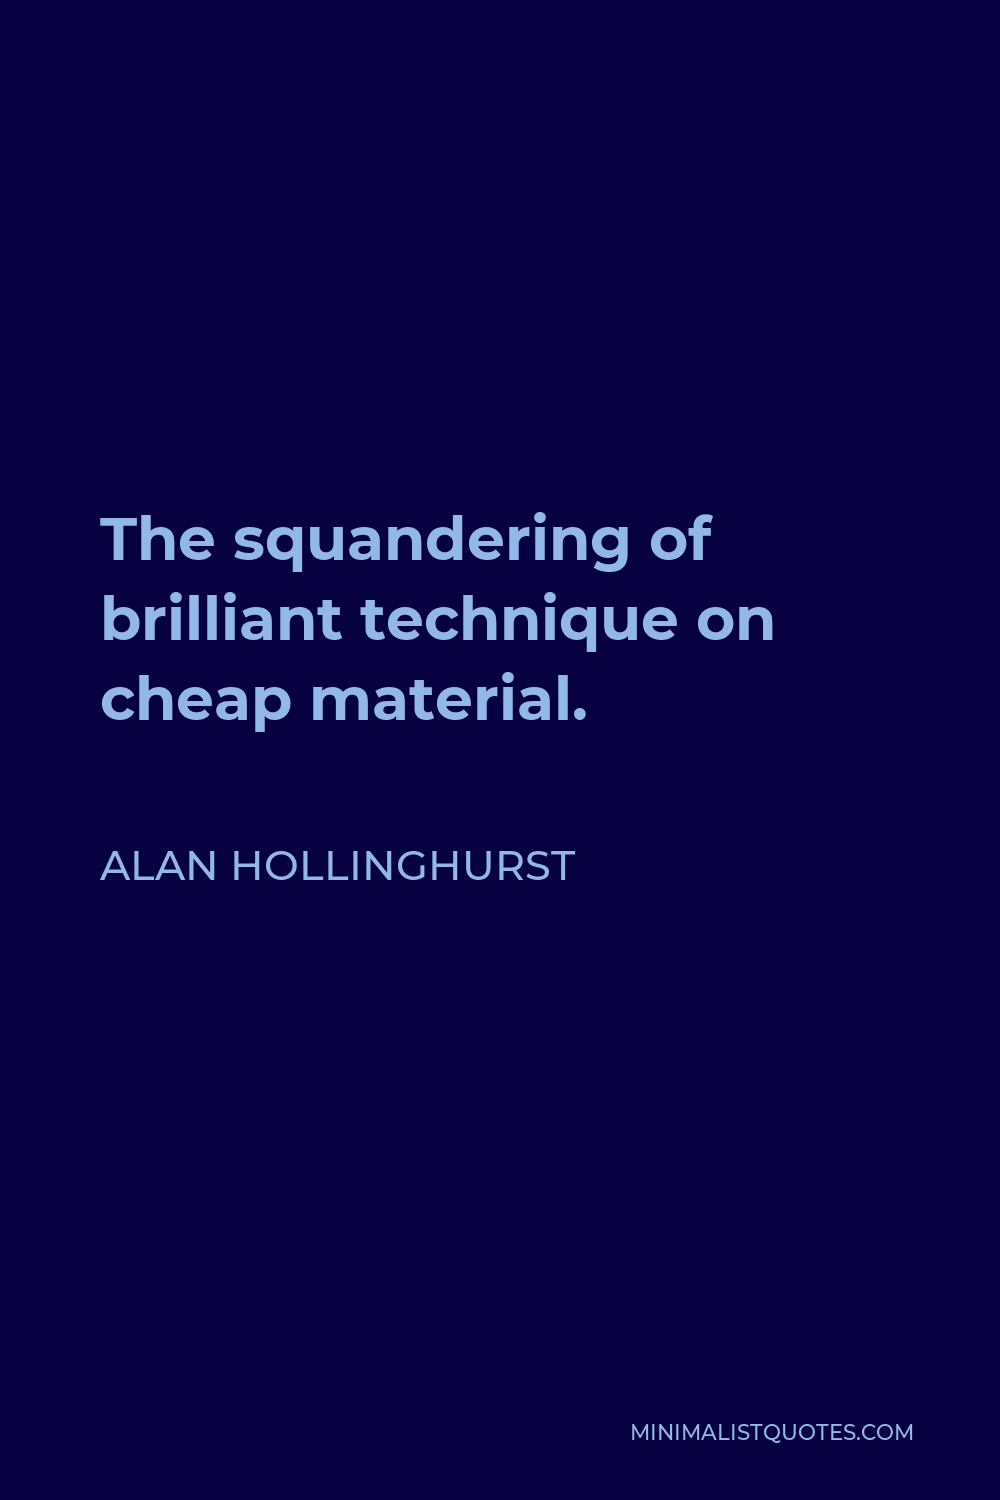 Alan Hollinghurst Quote - The squandering of brilliant technique on cheap material.